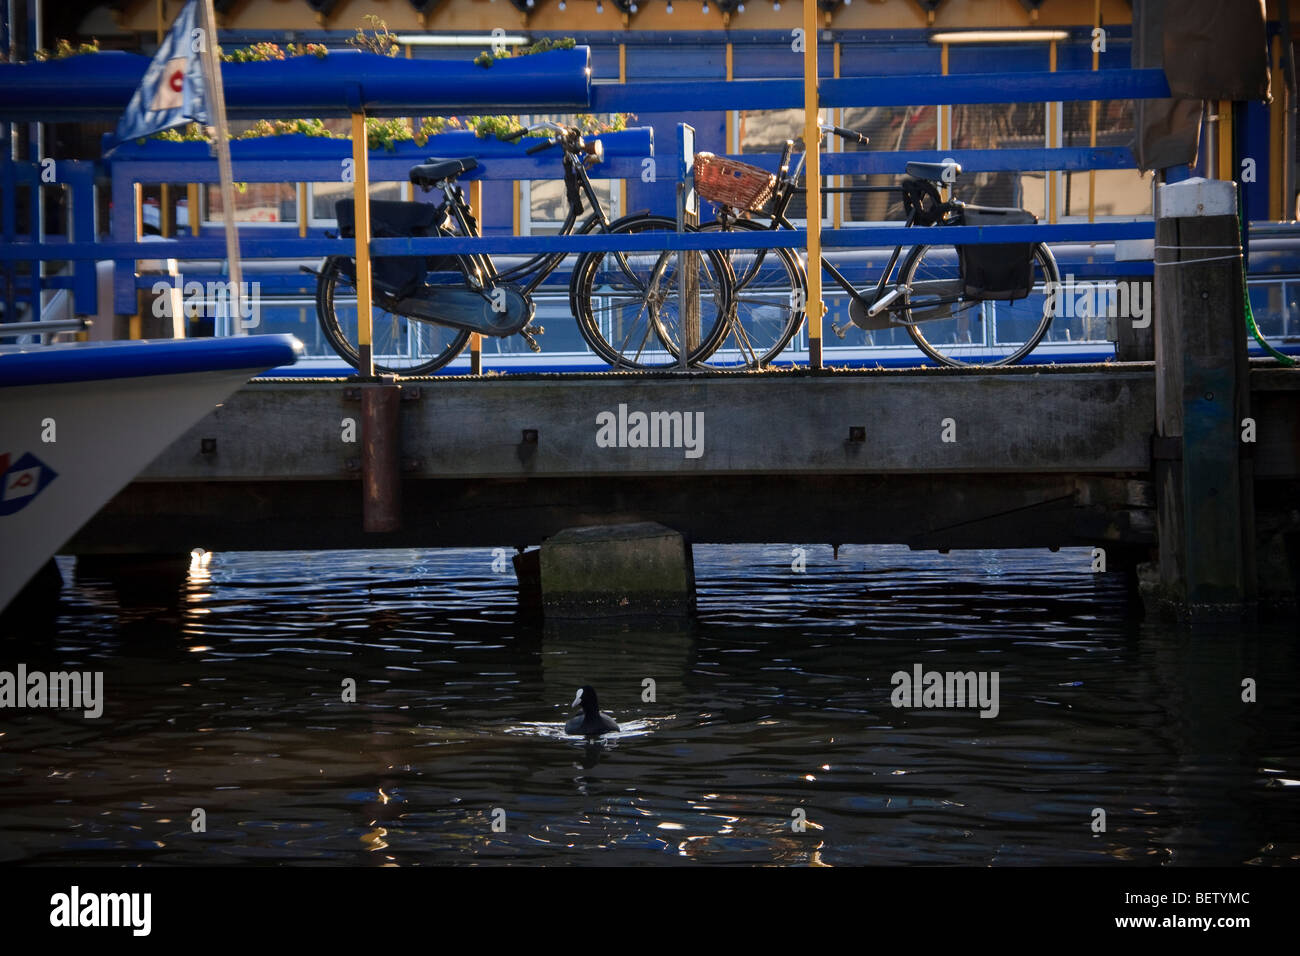 Cycle parked up on canal bridge, Amsterdam, Holland. Stock Photo